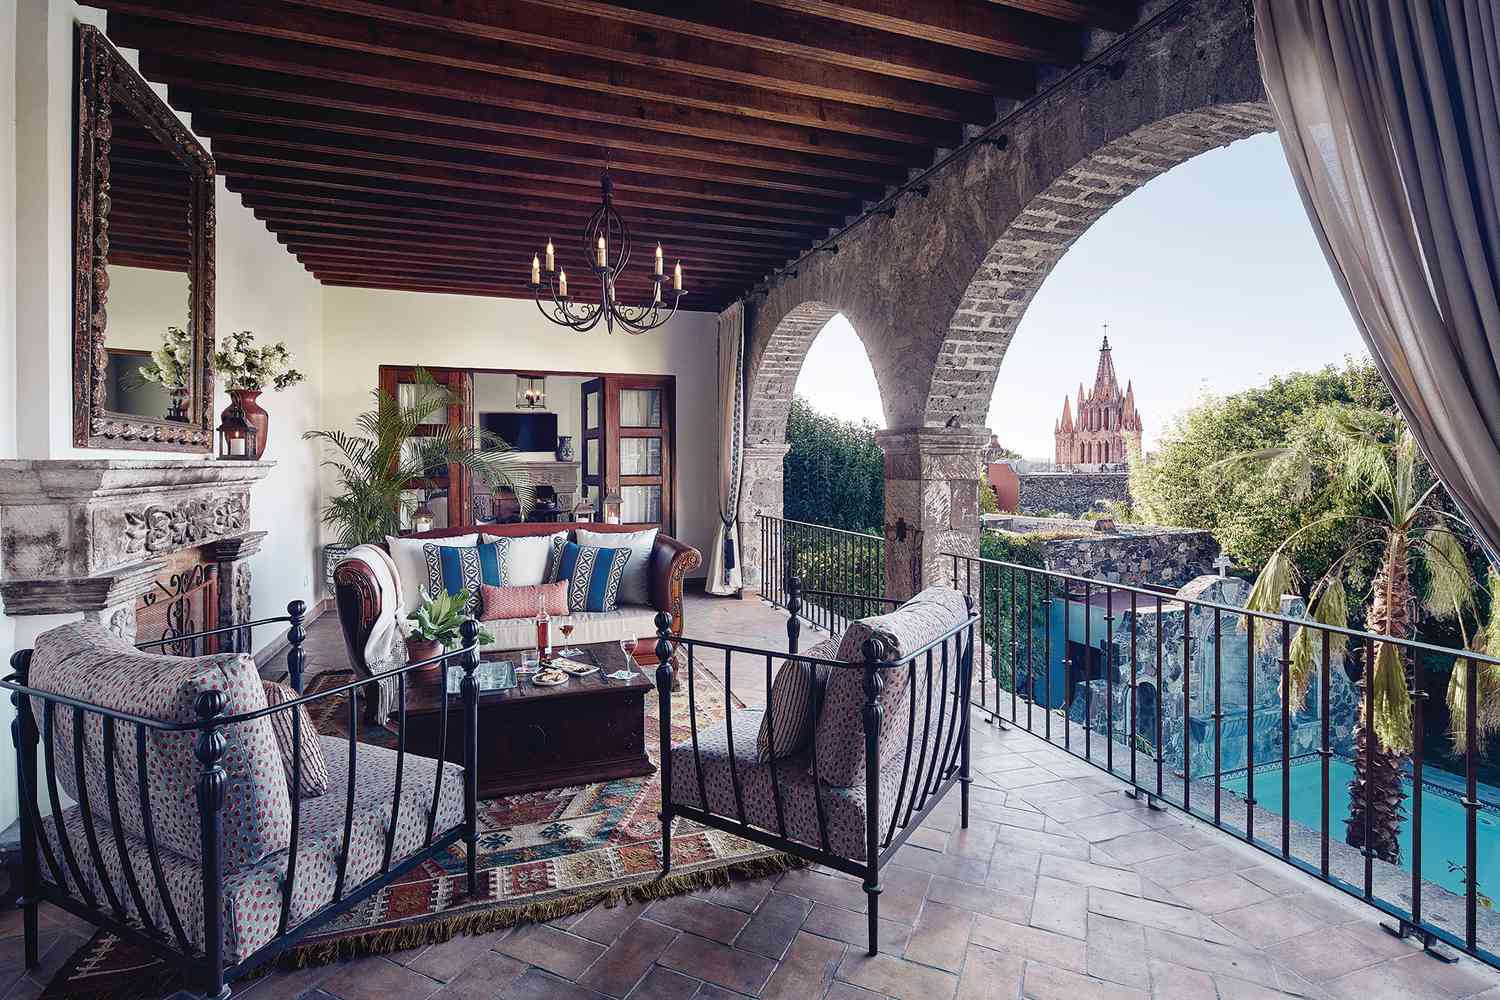 Terrace seating with city view at Casa de Sierra Nevada, a Belmond Hotel